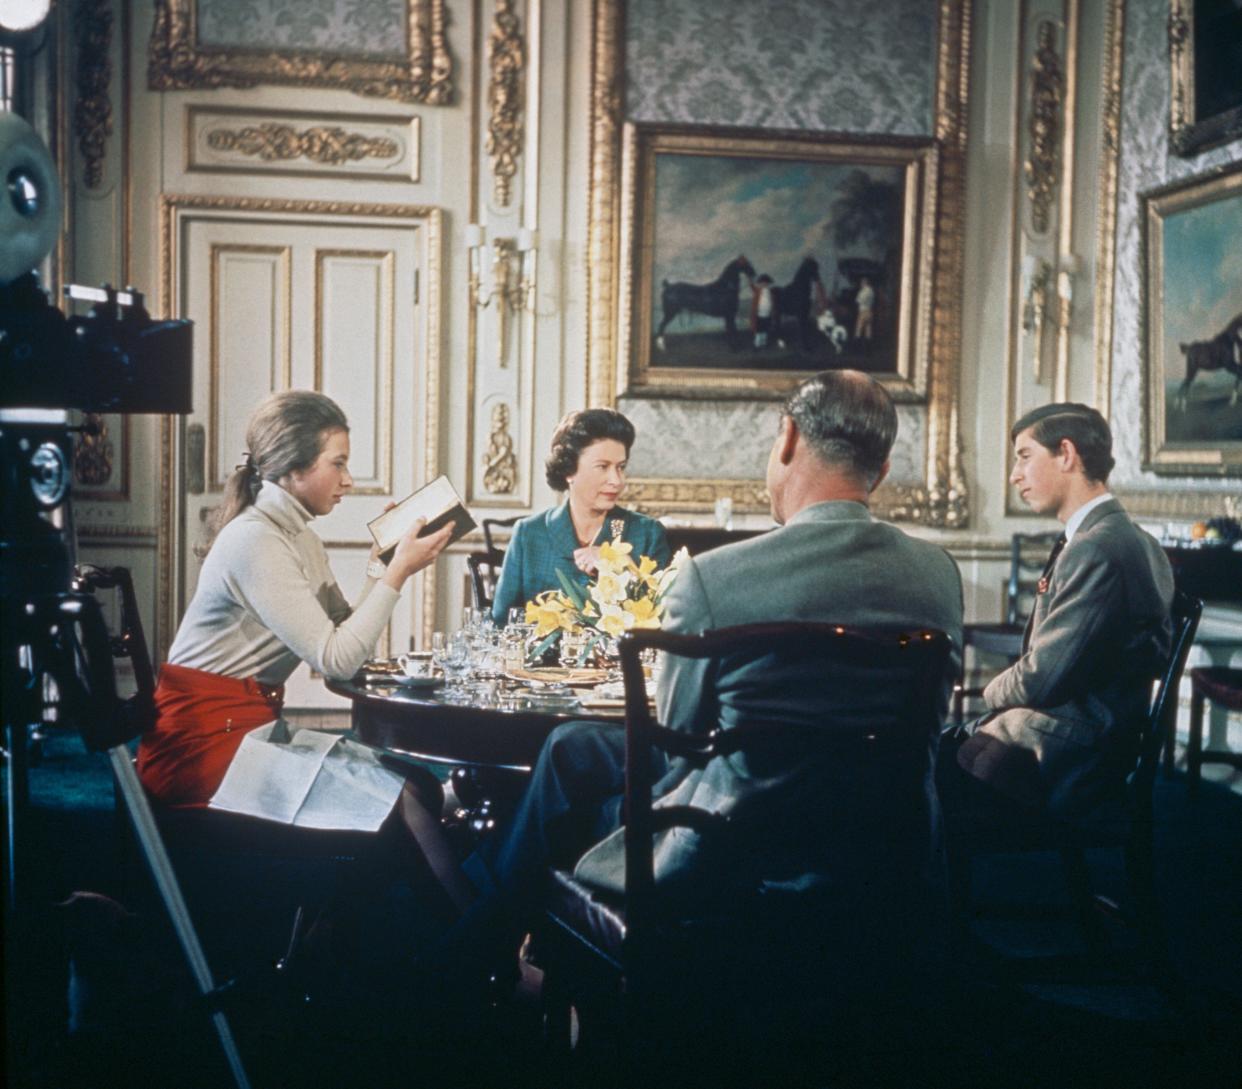 Queen Elizabeth II lunches with Prince Philip and their children Princess Anne and Prince Charles at Windsor Castle, circa 1969. A camera is set up to film for Richard Cawston's BBC documentary "Royal Family." which followed the royals over a period of a year and was broadcast on June 21, 1969. (Photo: Hulton Archive via Getty Images)